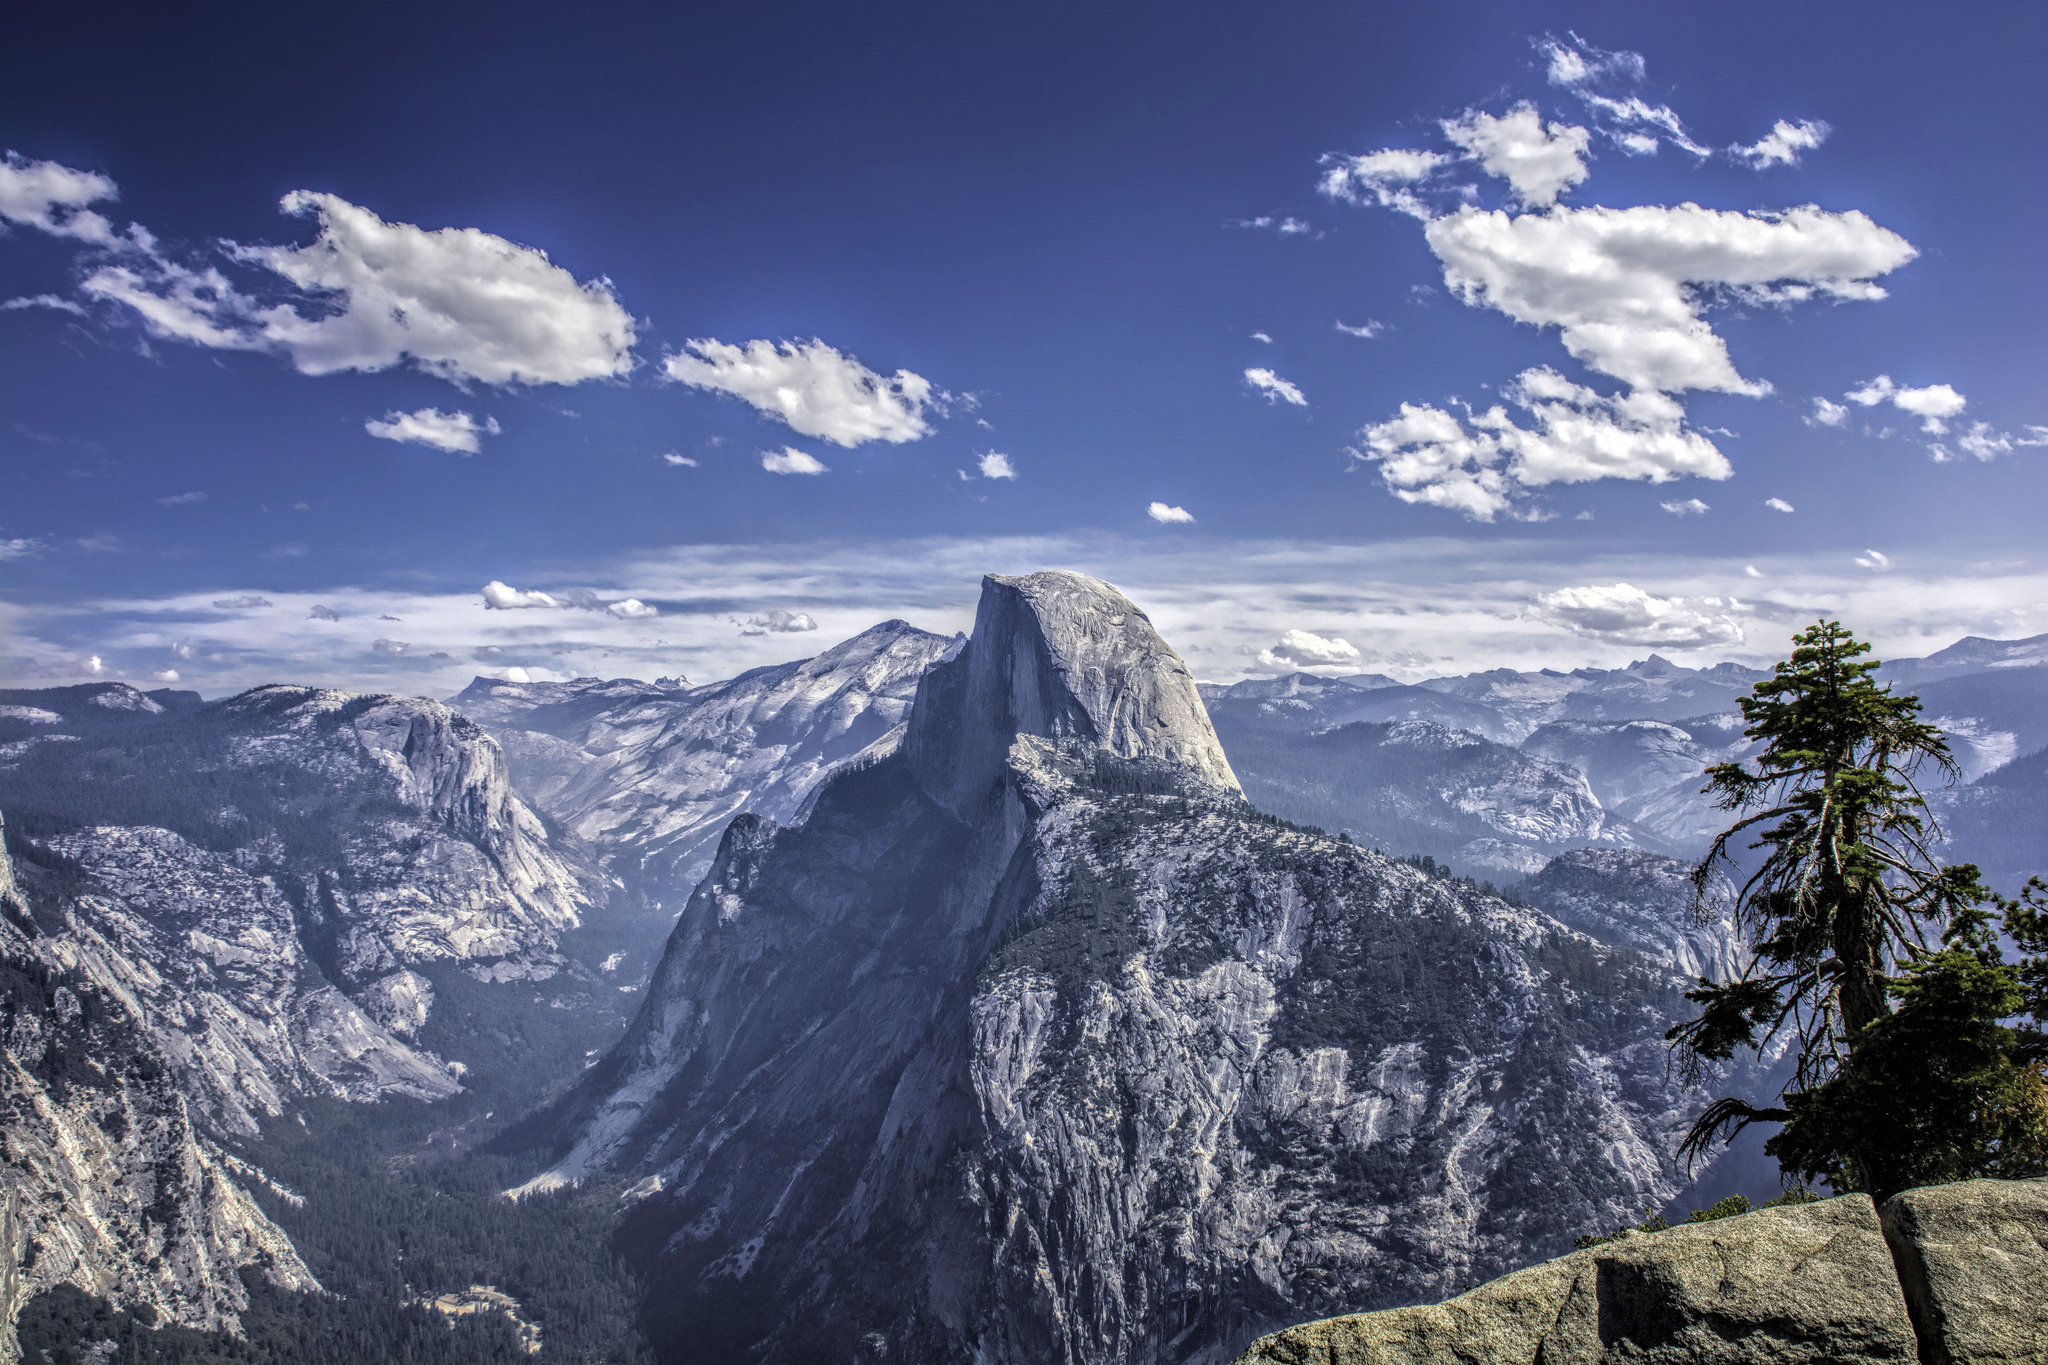 153027 download wallpaper nature, sky, mountains, usa, vertex, united states, tops, california, yosemite screensavers and pictures for free